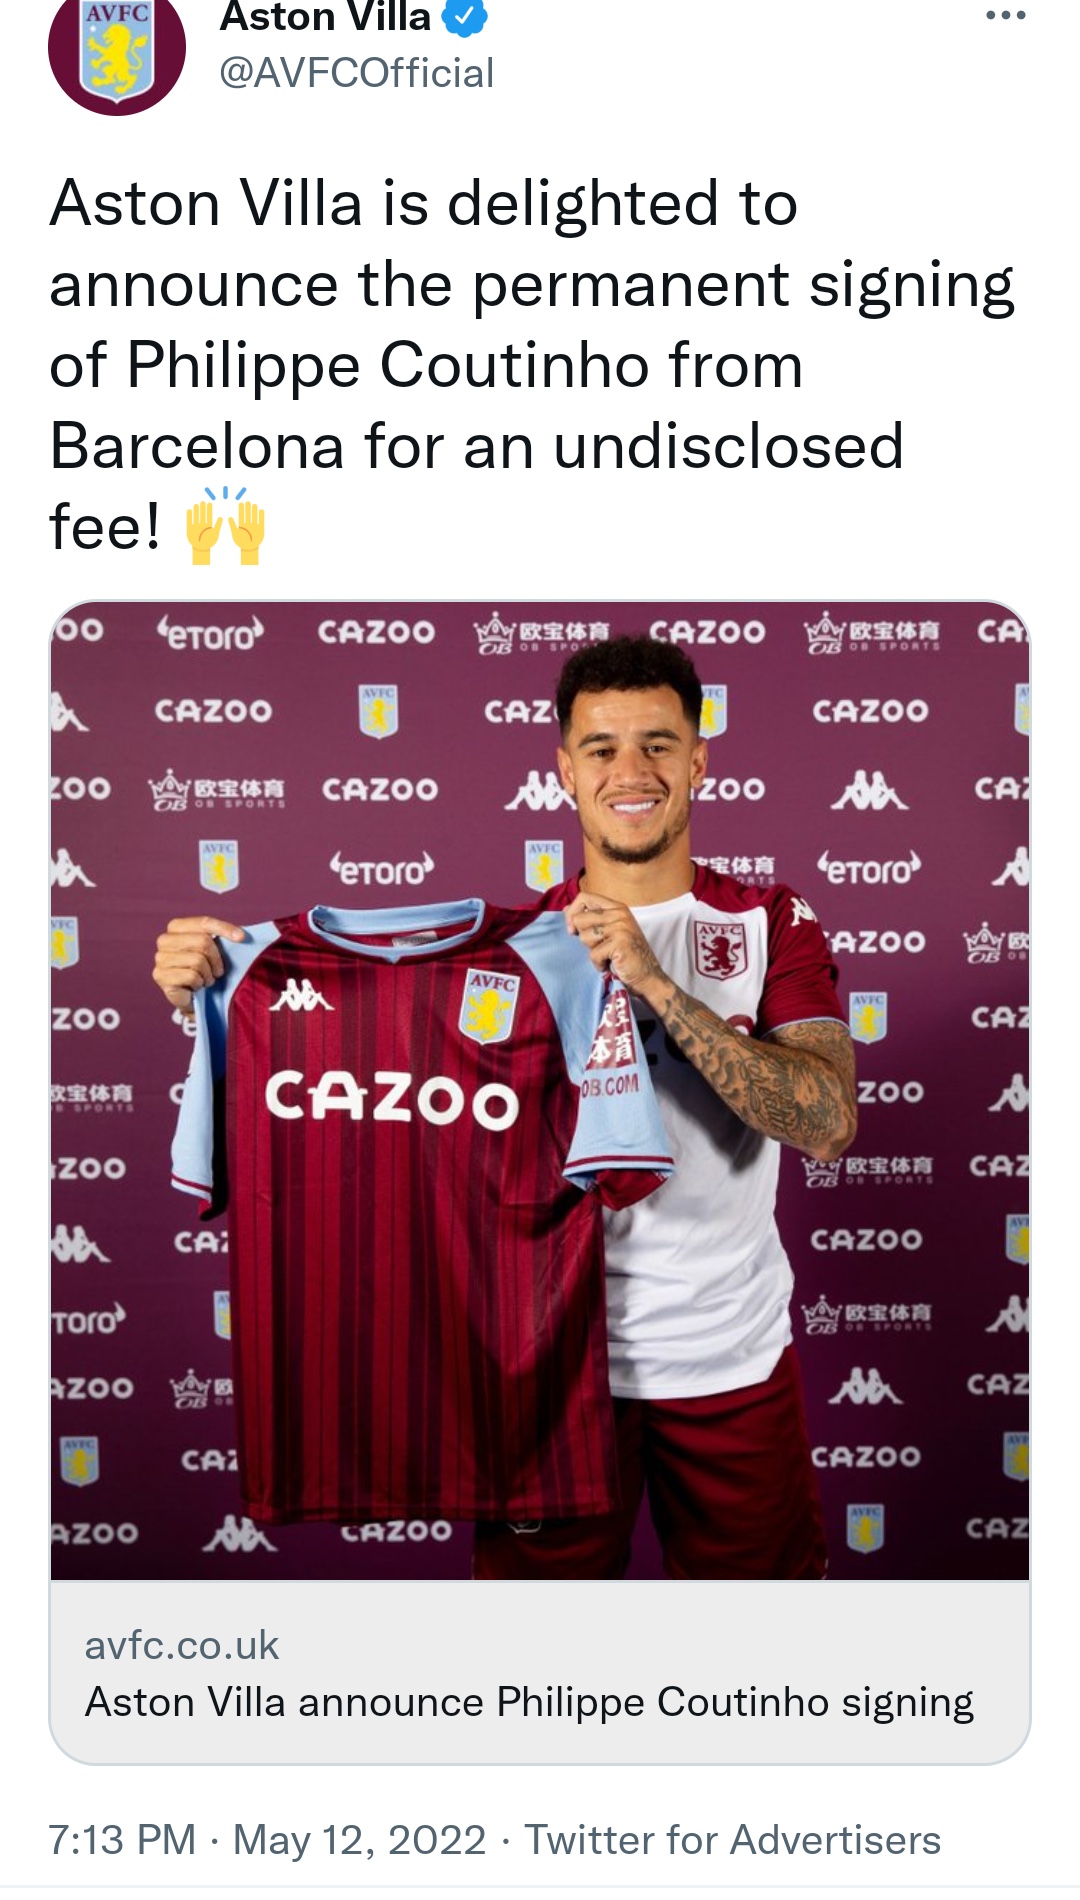 Philippe Coutinho permanently signs for Aston Villa from Barcelona